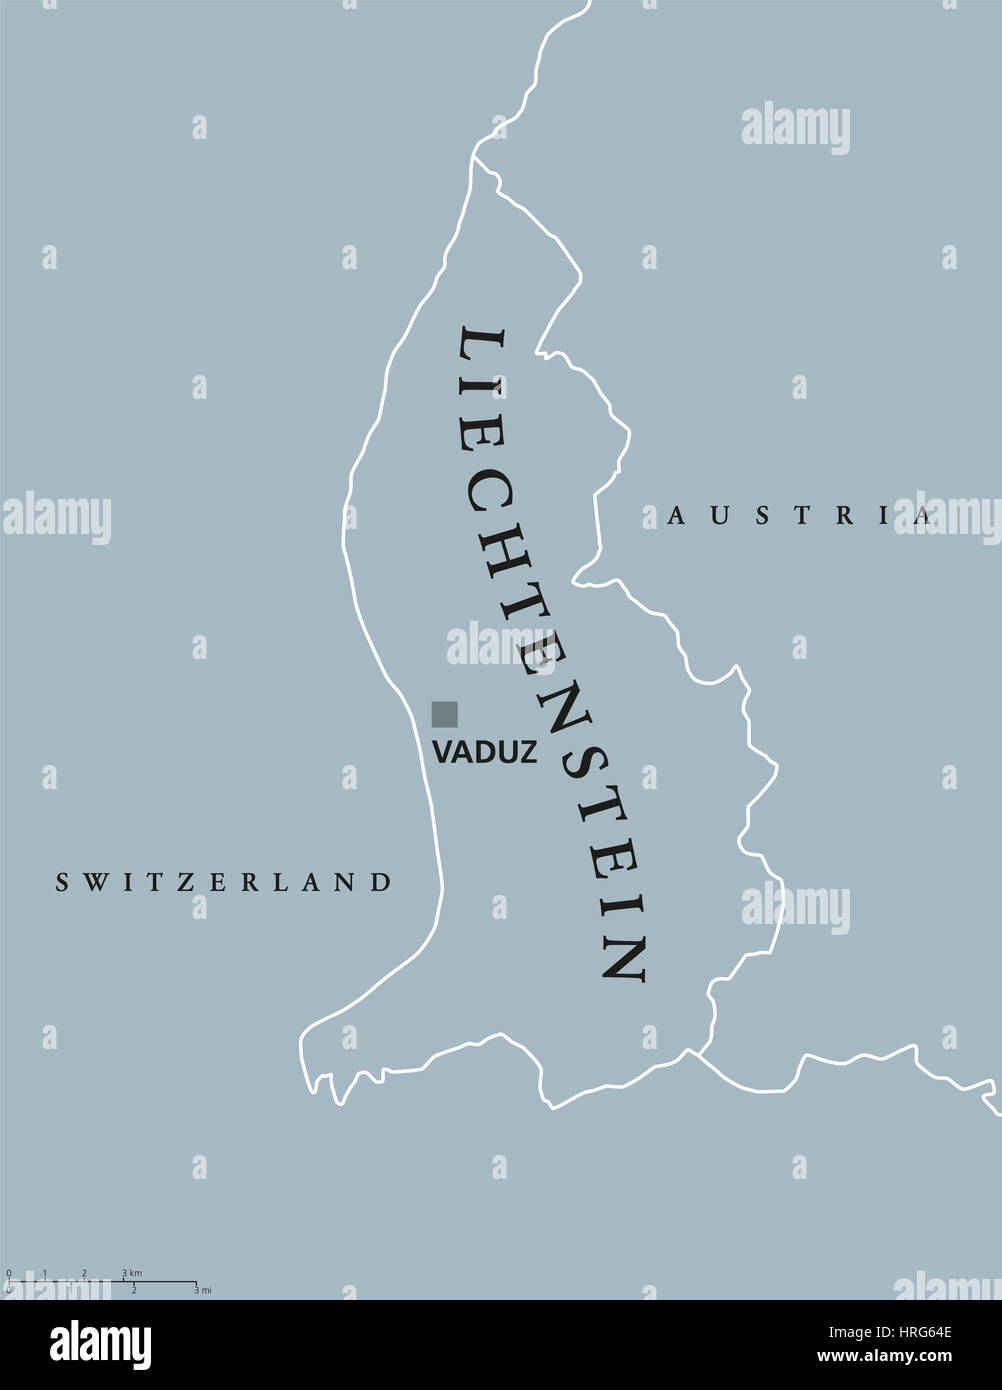 Liechtenstein political map with capital Vaduz, national borders and neighbor countries. Principality and landlocked microstate in Central Europe. Stock Photo